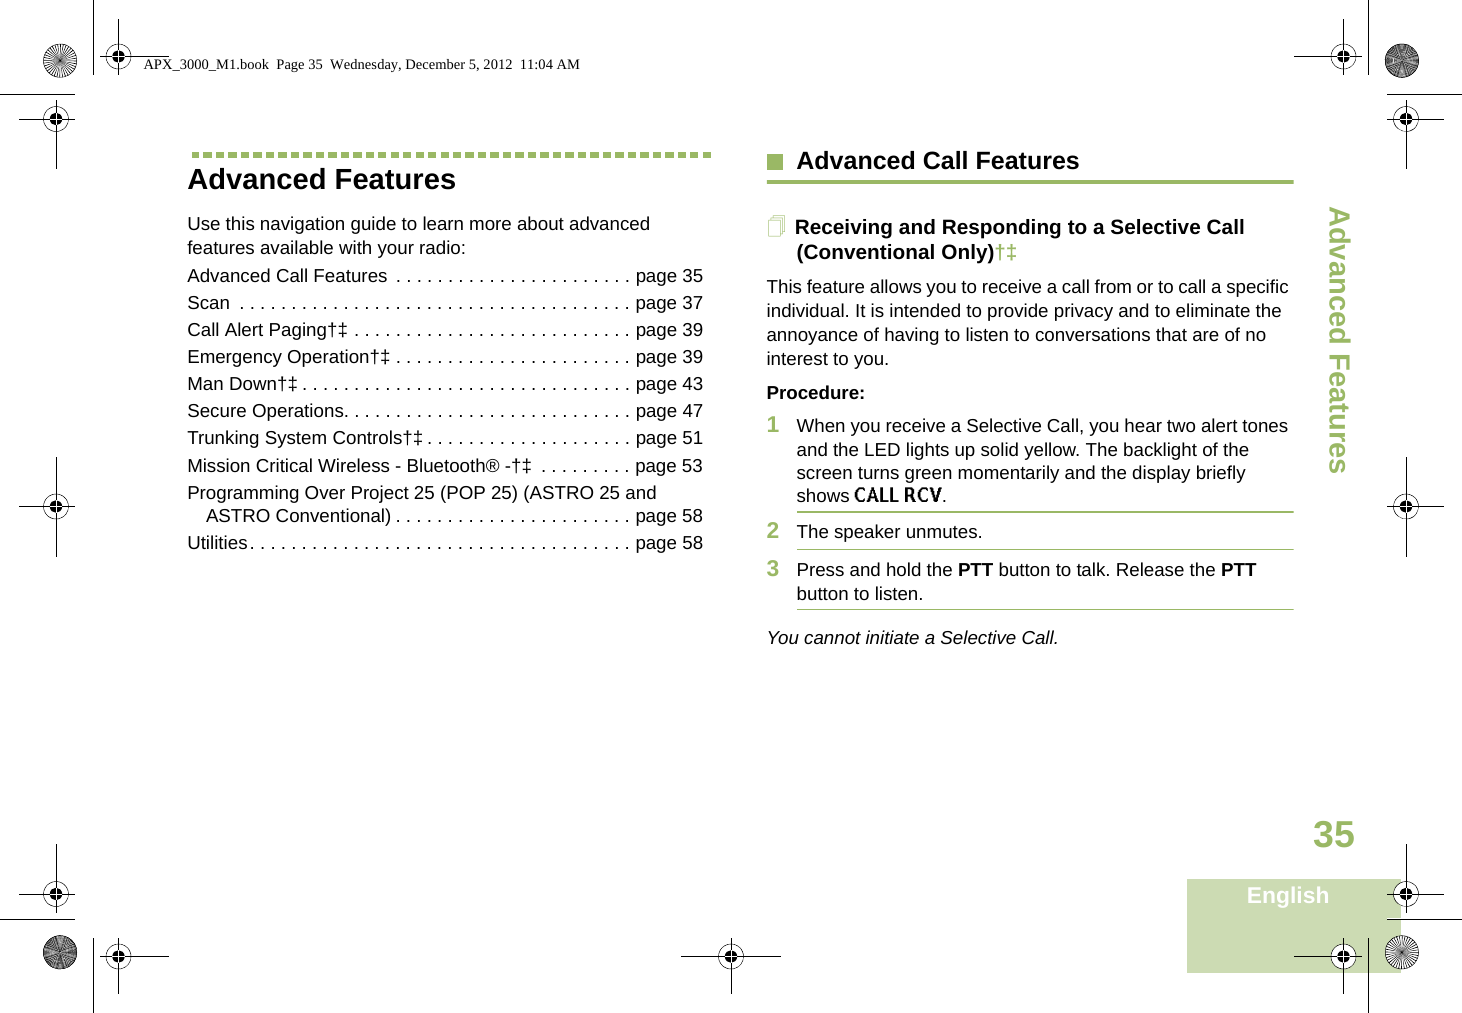 Advanced FeaturesEnglish35Advanced FeaturesUse this navigation guide to learn more about advanced features available with your radio:Advanced Call Features  . . . . . . . . . . . . . . . . . . . . . . . page 35Scan  . . . . . . . . . . . . . . . . . . . . . . . . . . . . . . . . . . . . . . page 37Call Alert Paging†‡ . . . . . . . . . . . . . . . . . . . . . . . . . . . page 39Emergency Operation†‡ . . . . . . . . . . . . . . . . . . . . . . . page 39Man Down†‡ . . . . . . . . . . . . . . . . . . . . . . . . . . . . . . . . page 43Secure Operations. . . . . . . . . . . . . . . . . . . . . . . . . . . . page 47Trunking System Controls†‡ . . . . . . . . . . . . . . . . . . . . page 51Mission Critical Wireless - Bluetooth® -†‡  . . . . . . . . . page 53Programming Over Project 25 (POP 25) (ASTRO 25 and ASTRO Conventional) . . . . . . . . . . . . . . . . . . . . . . . page 58Utilities. . . . . . . . . . . . . . . . . . . . . . . . . . . . . . . . . . . . . page 58Advanced Call FeaturesReceiving and Responding to a Selective Call (Conventional Only)†‡This feature allows you to receive a call from or to call a specific individual. It is intended to provide privacy and to eliminate the annoyance of having to listen to conversations that are of no interest to you.Procedure:1When you receive a Selective Call, you hear two alert tones and the LED lights up solid yellow. The backlight of the screen turns green momentarily and the display briefly shows CALL RCV.2The speaker unmutes.3Press and hold the PTT button to talk. Release the PTT button to listen.You cannot initiate a Selective Call.APX_3000_M1.book  Page 35  Wednesday, December 5, 2012  11:04 AM